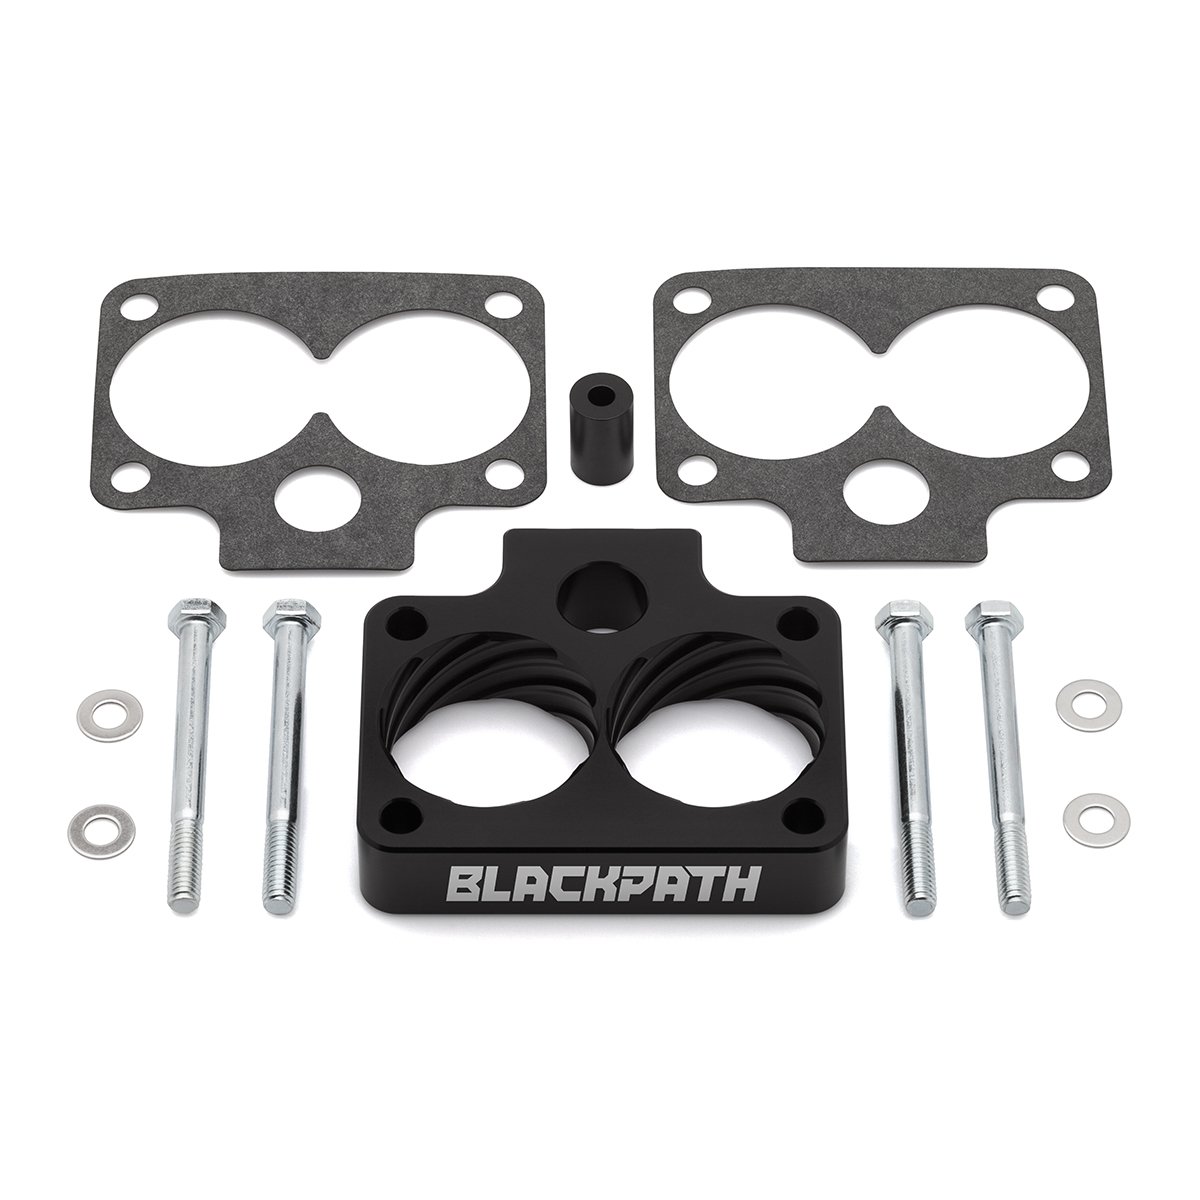 Throttle Body Spacer Anodized Black For 94-01 Dodge Ram 1500 2500 3.9L 2001 Dodge Ram 1500 Throttle Body Spacer